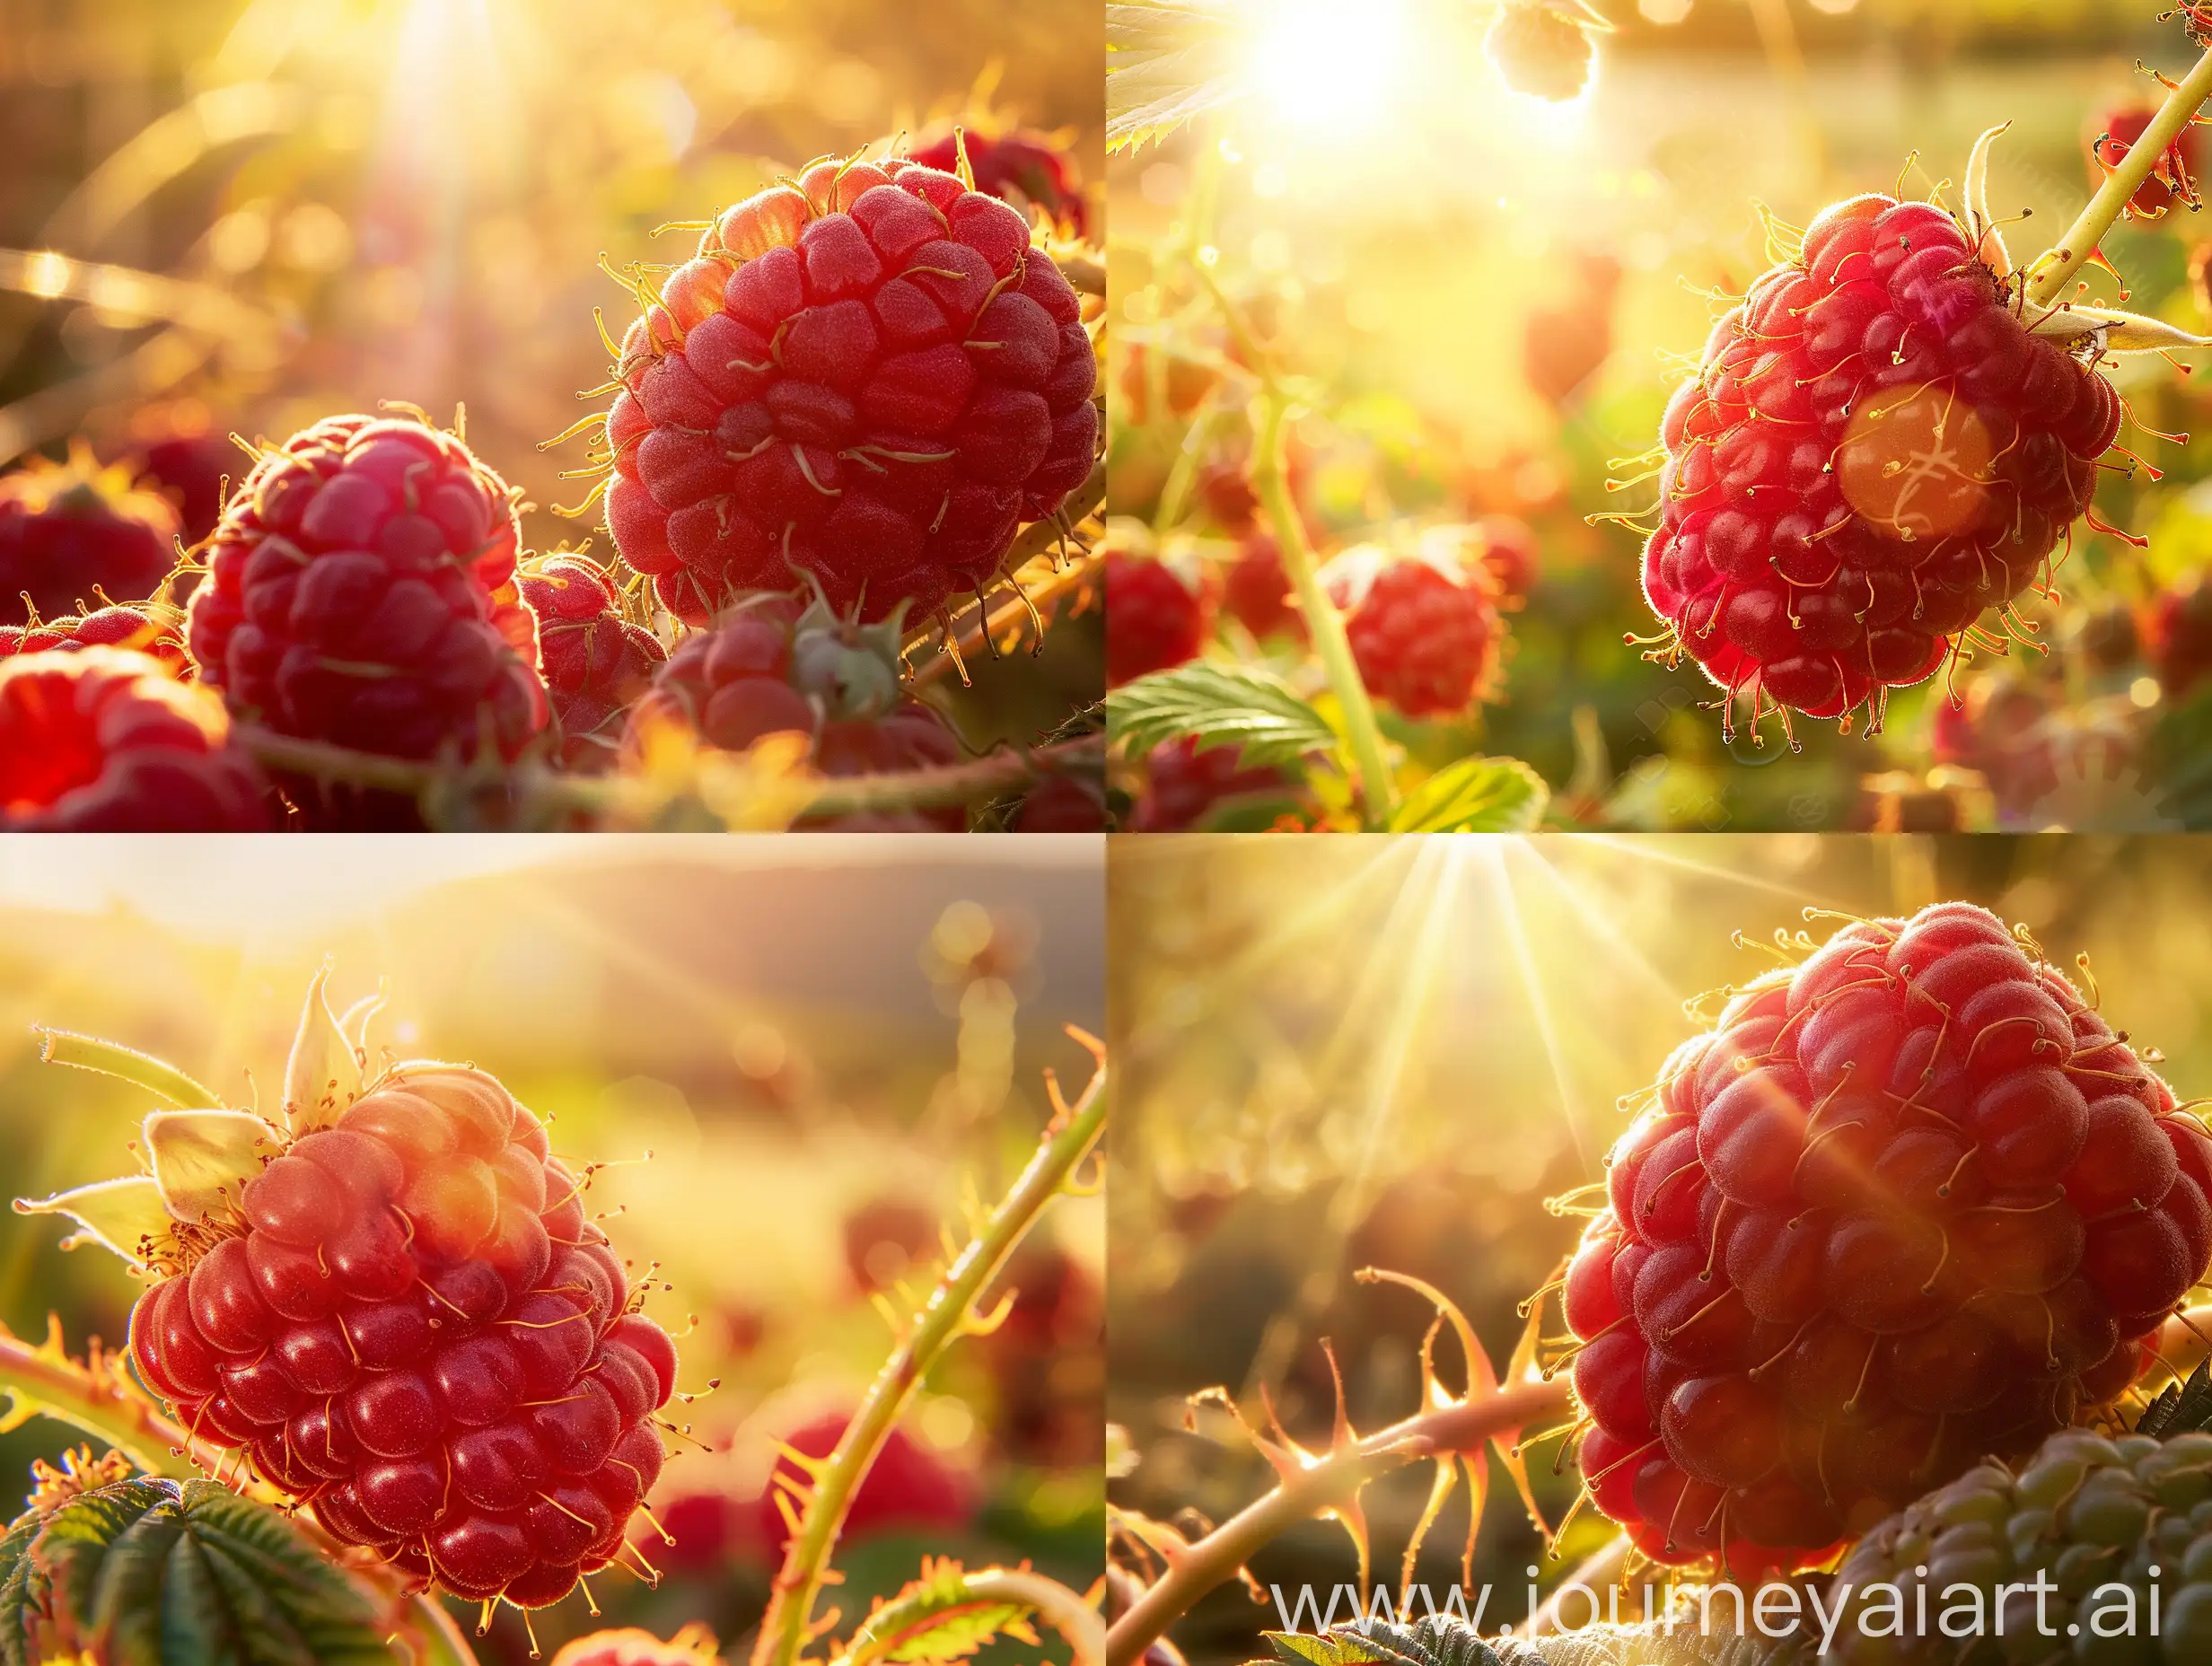 Close up high detailed photo capturing a Raspberry, Crimson Giant PPAF. The sun, casting a warm, golden glow, bathes the scene in a serene ambiance, illuminating the intricate details of each element. The composition centers on a Raspberry, Crimson Giant PPAF. Giants in raspberries, these very large, conical berries are exceptionally bright red and ripen late September through October. Fruits are firm, easy to pick and easily release when handpicking. Canes produce sparse short stout spines in the fruiting regi. The image evokes a sense of tranquility and natural beauty, inviting viewers to immerse themselves in the splendor of the landscape. --ar 16:9 